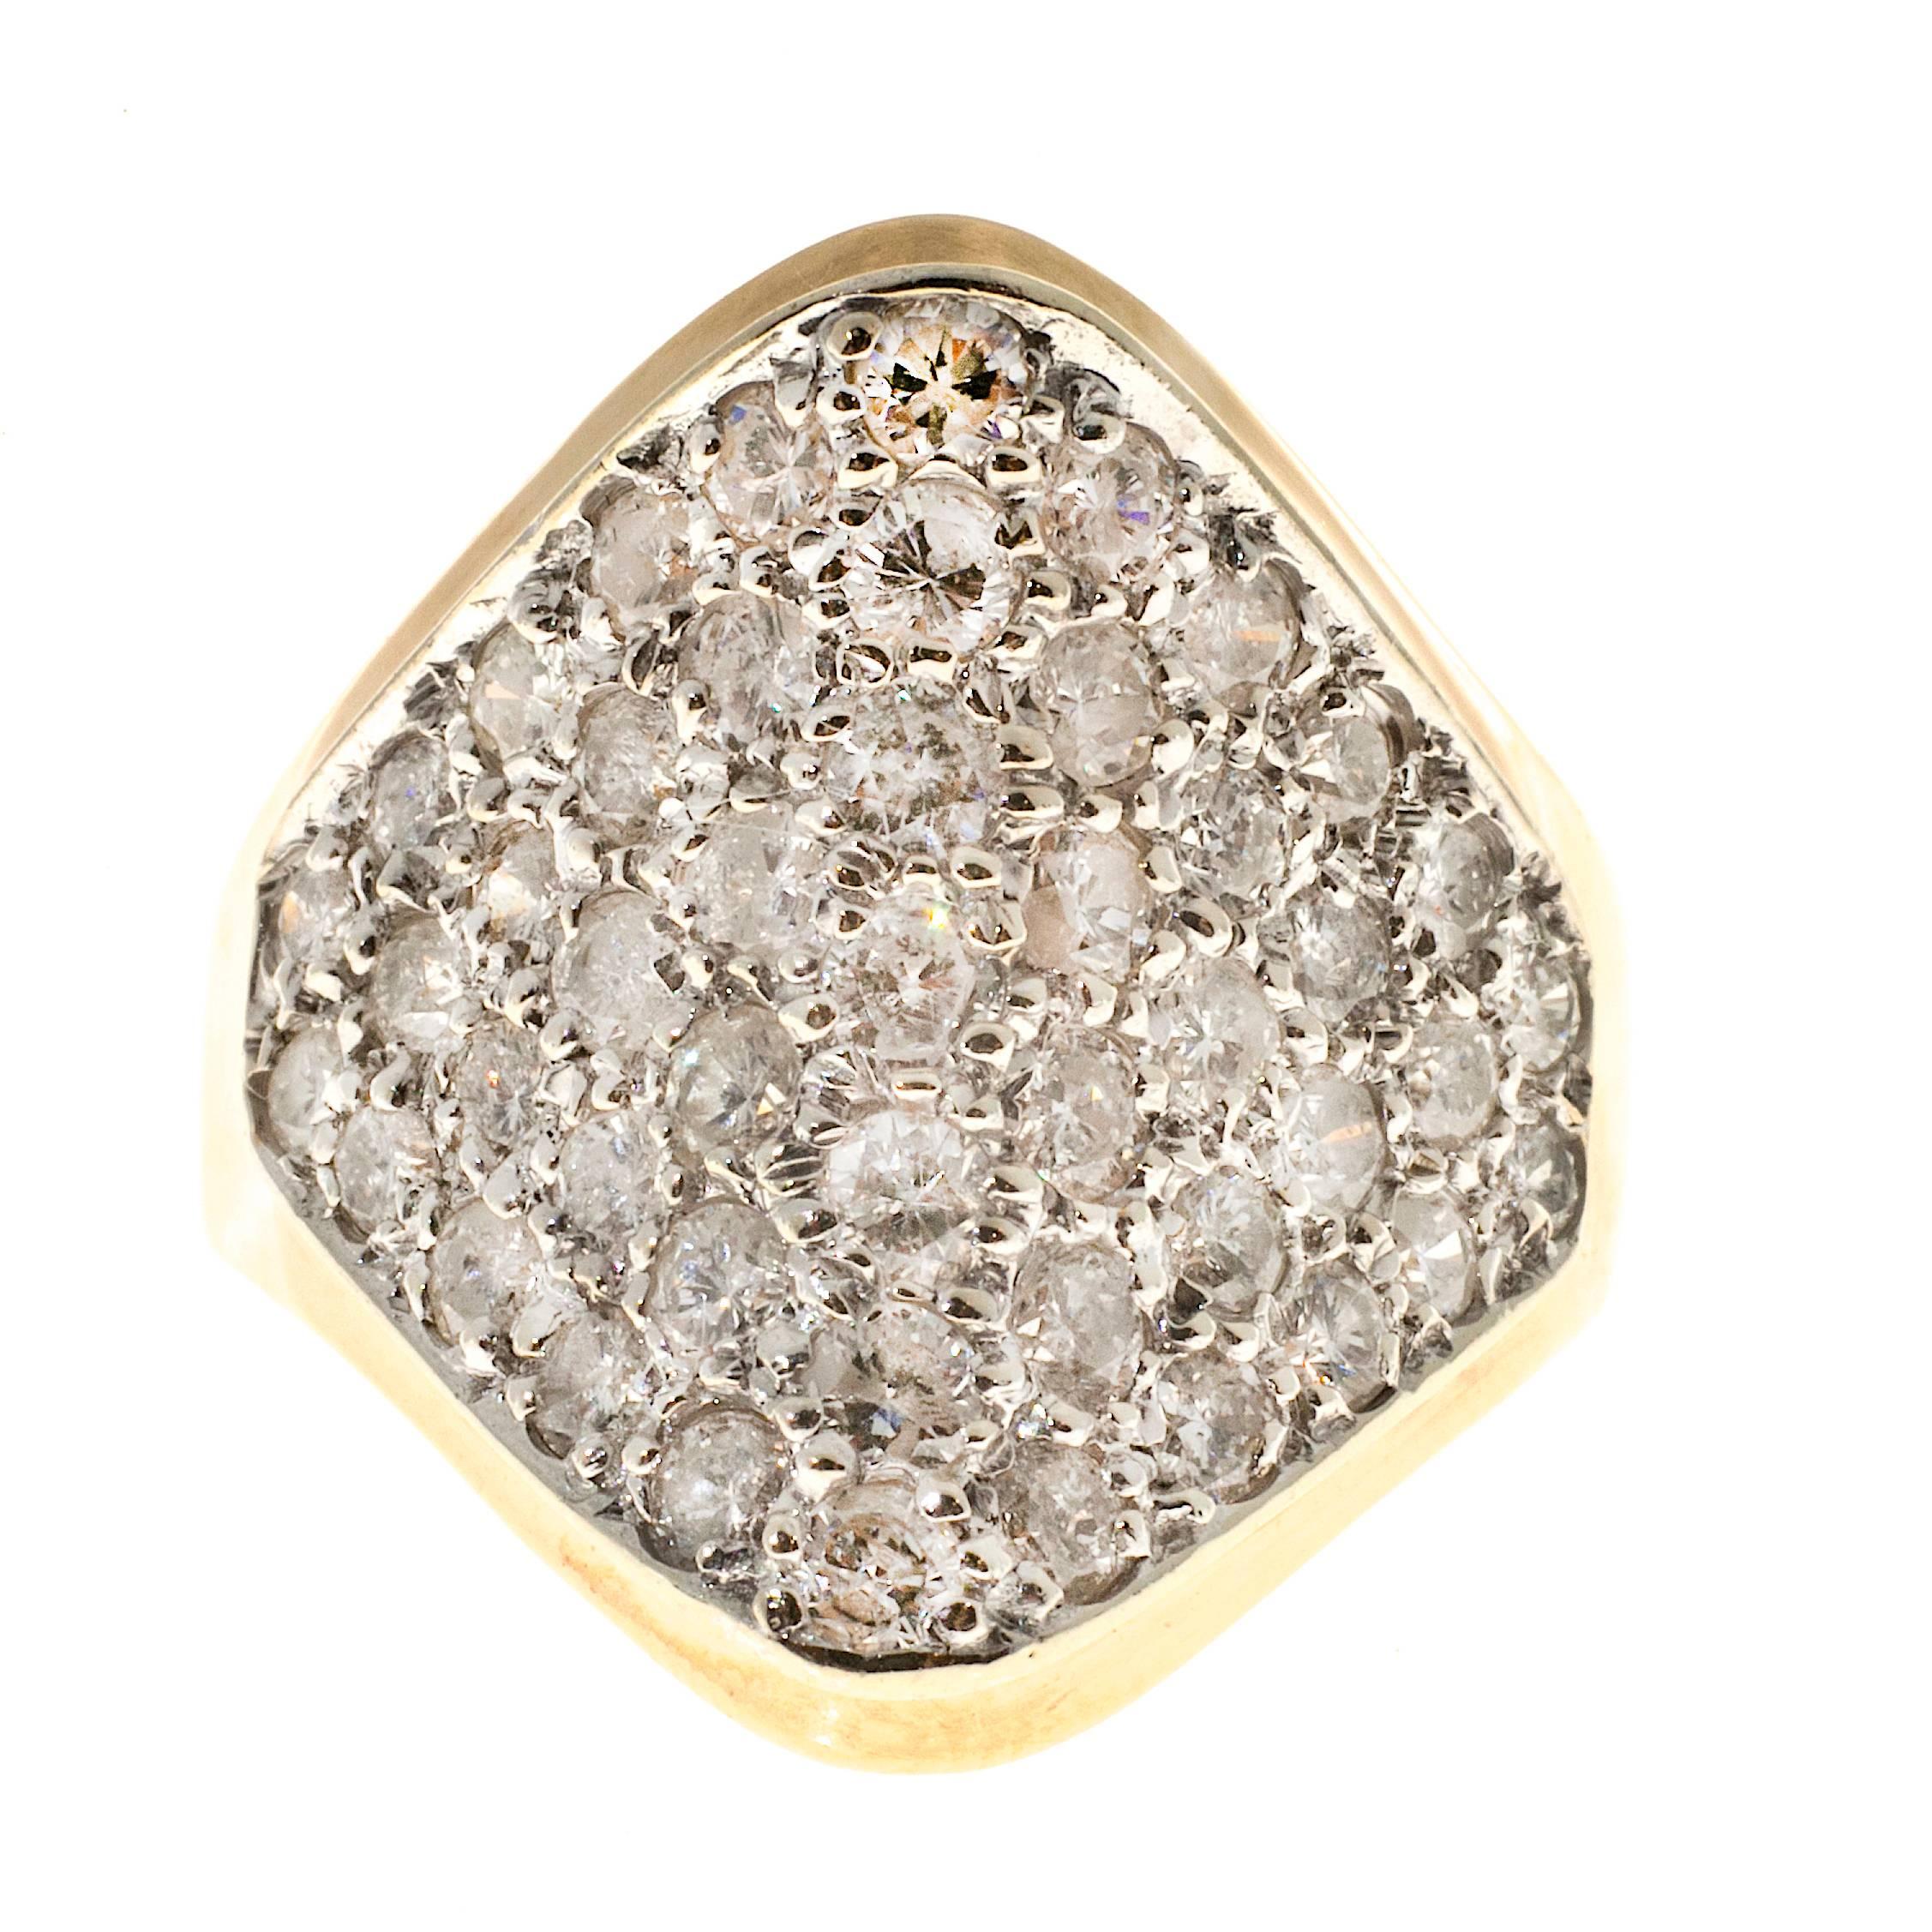 White gold center plate pave set end to end with bright white sparkly diamonds all full cut. The setting itself is 14k yellow gold. 

47 round diamonds approx. total weight 1.50cts, F color, SI to SI3 clarity
14k Yellow Gold
Stamped: L 14k
8.1